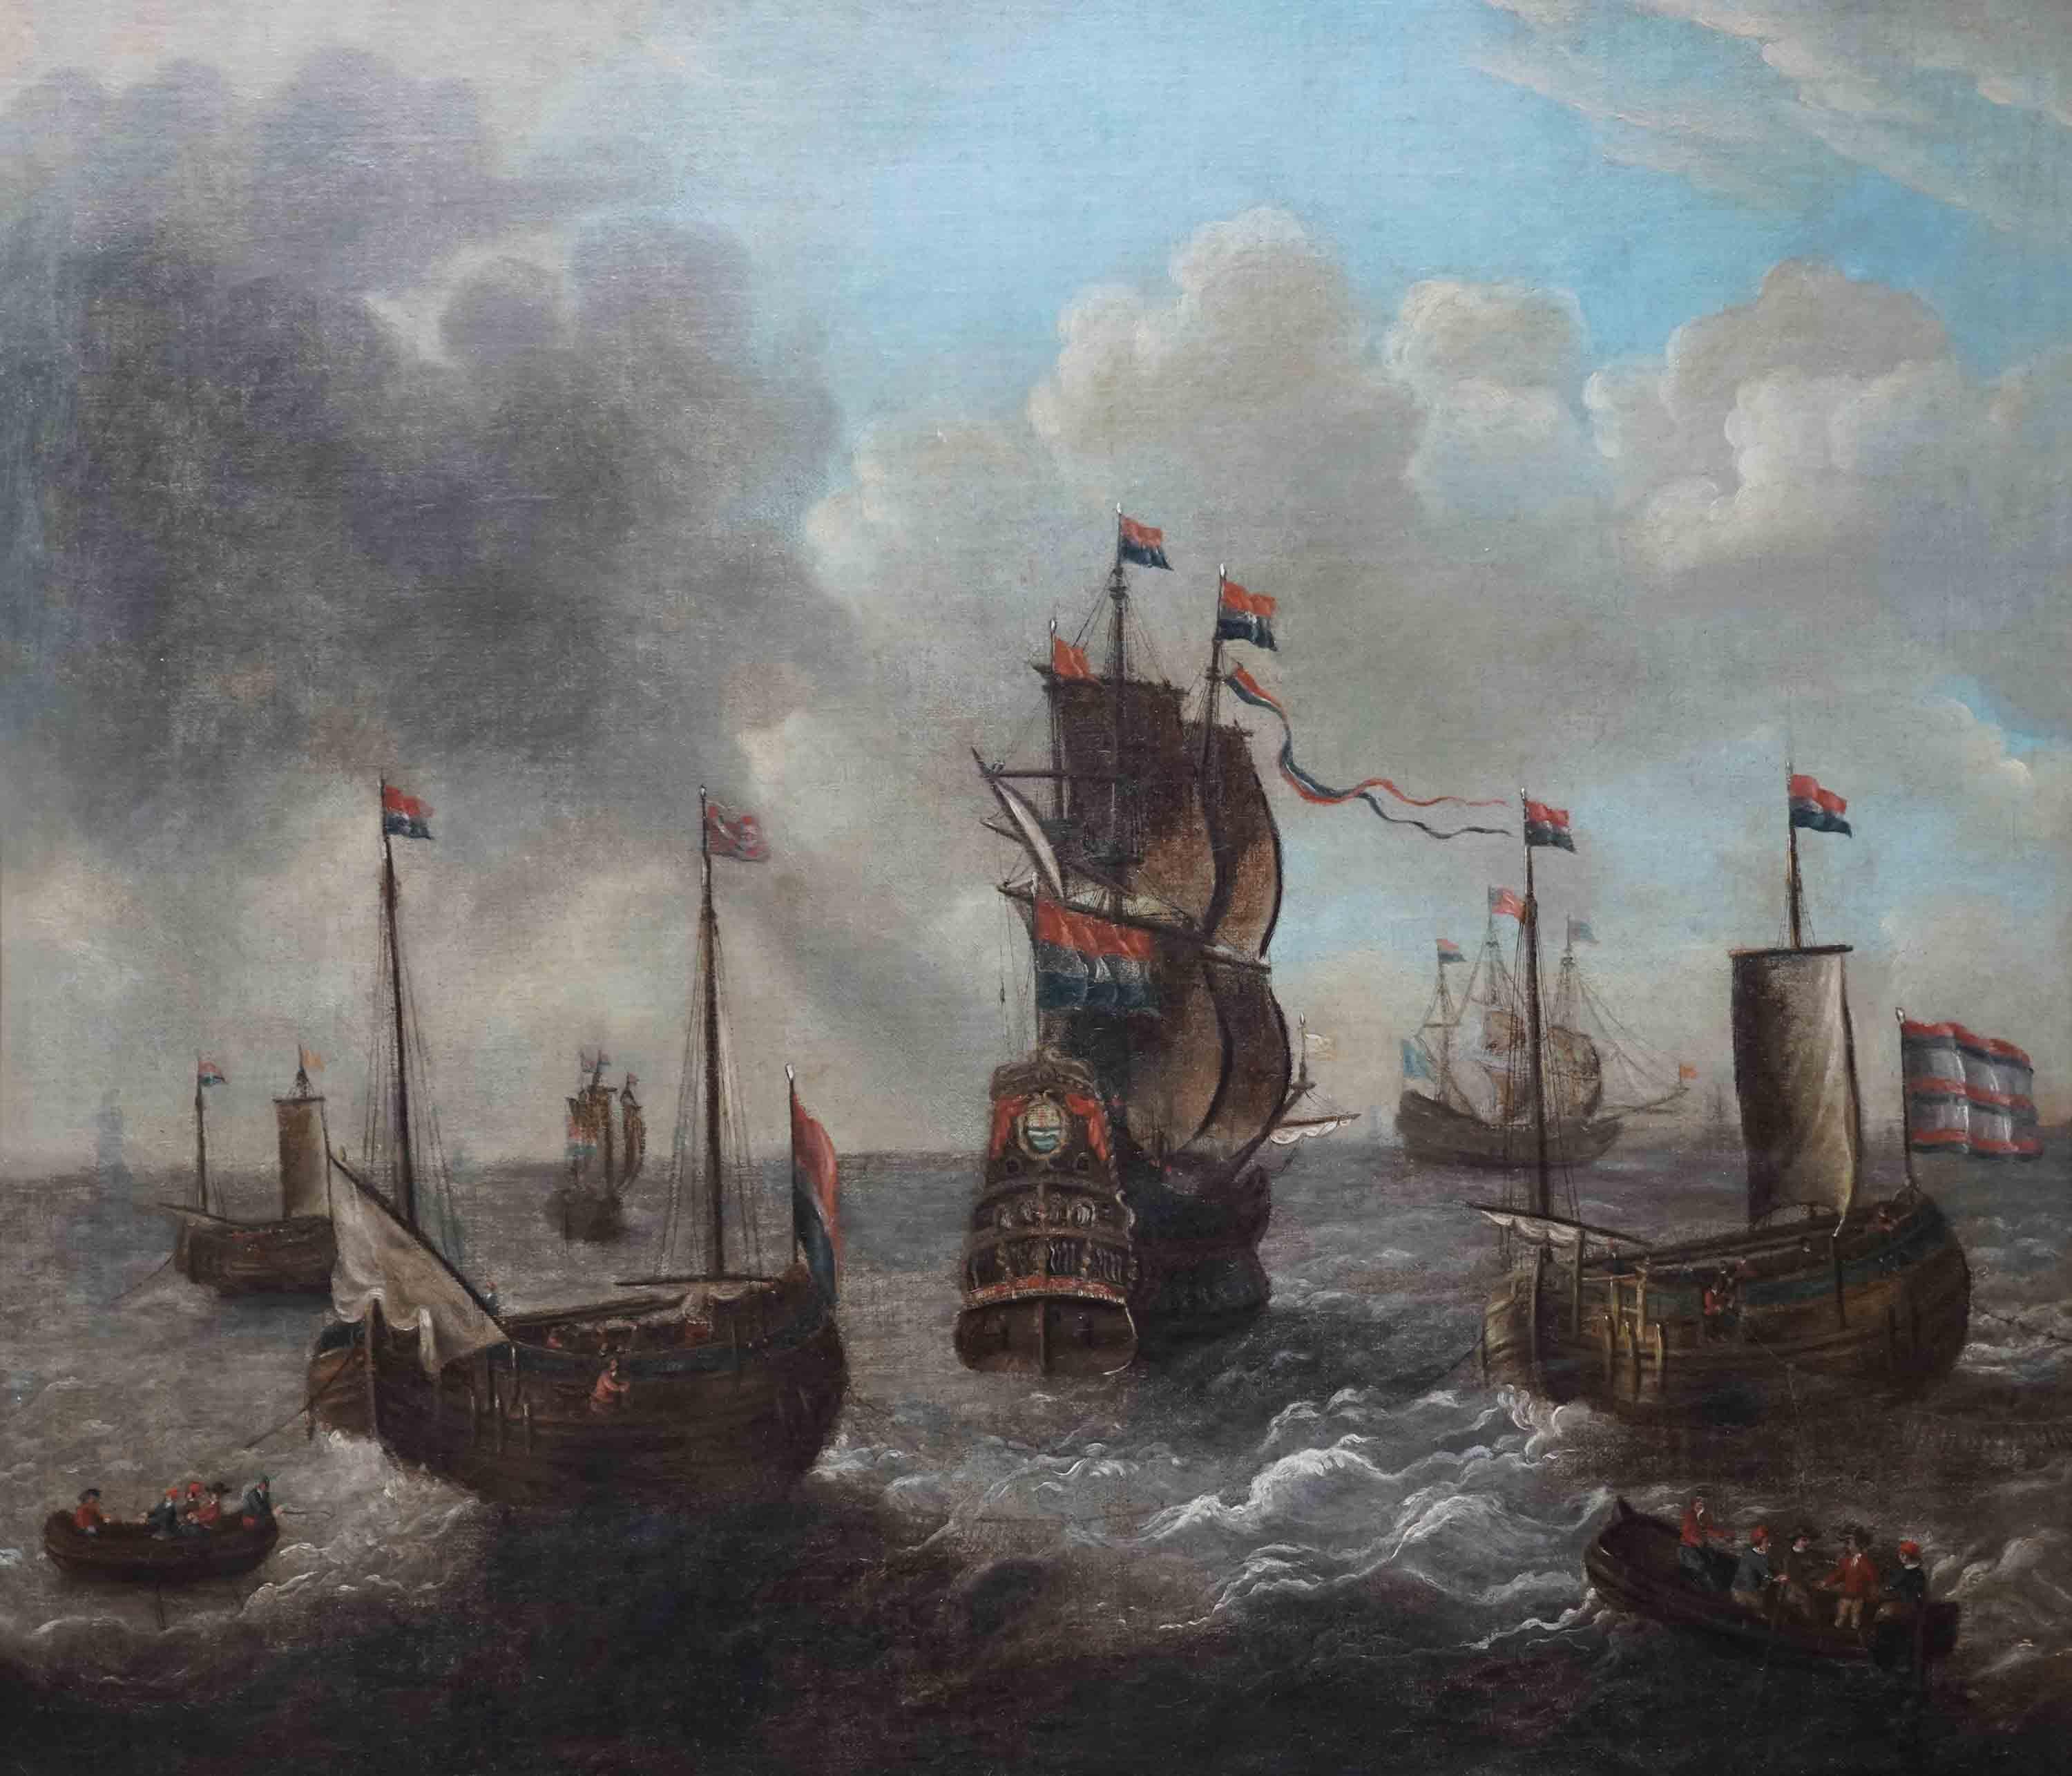 Ships Heading to Sea - Dutch 17th century Old Master marine art oil painting - Painting by Abraham Storck